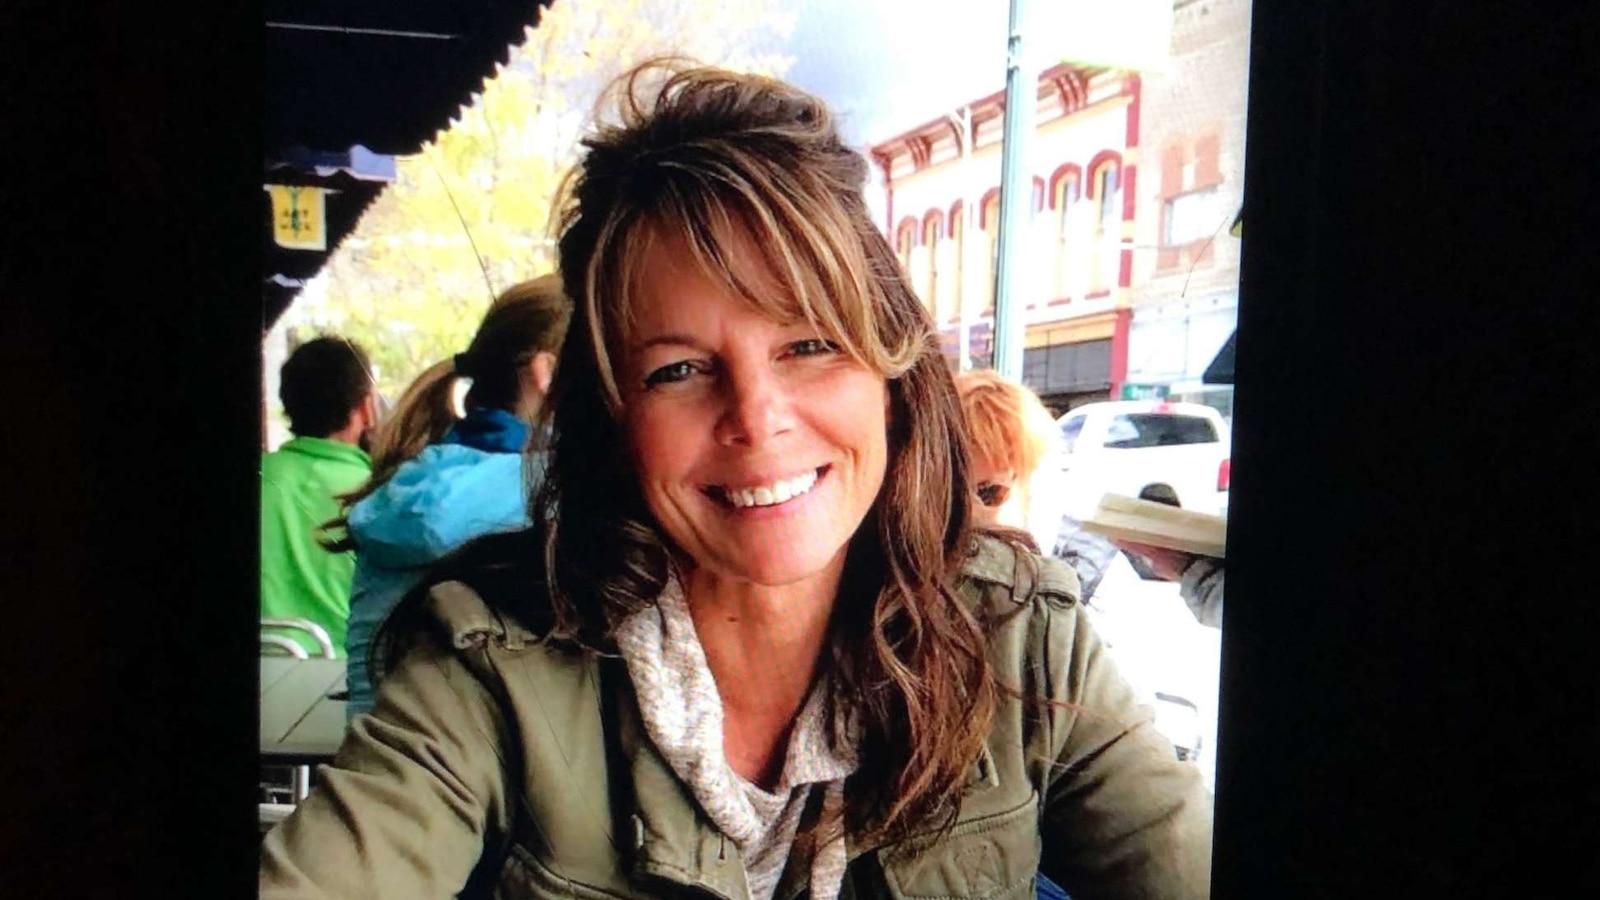 Suzanne Morphew, mother who went missing on a bike ride, died as a result of homicide